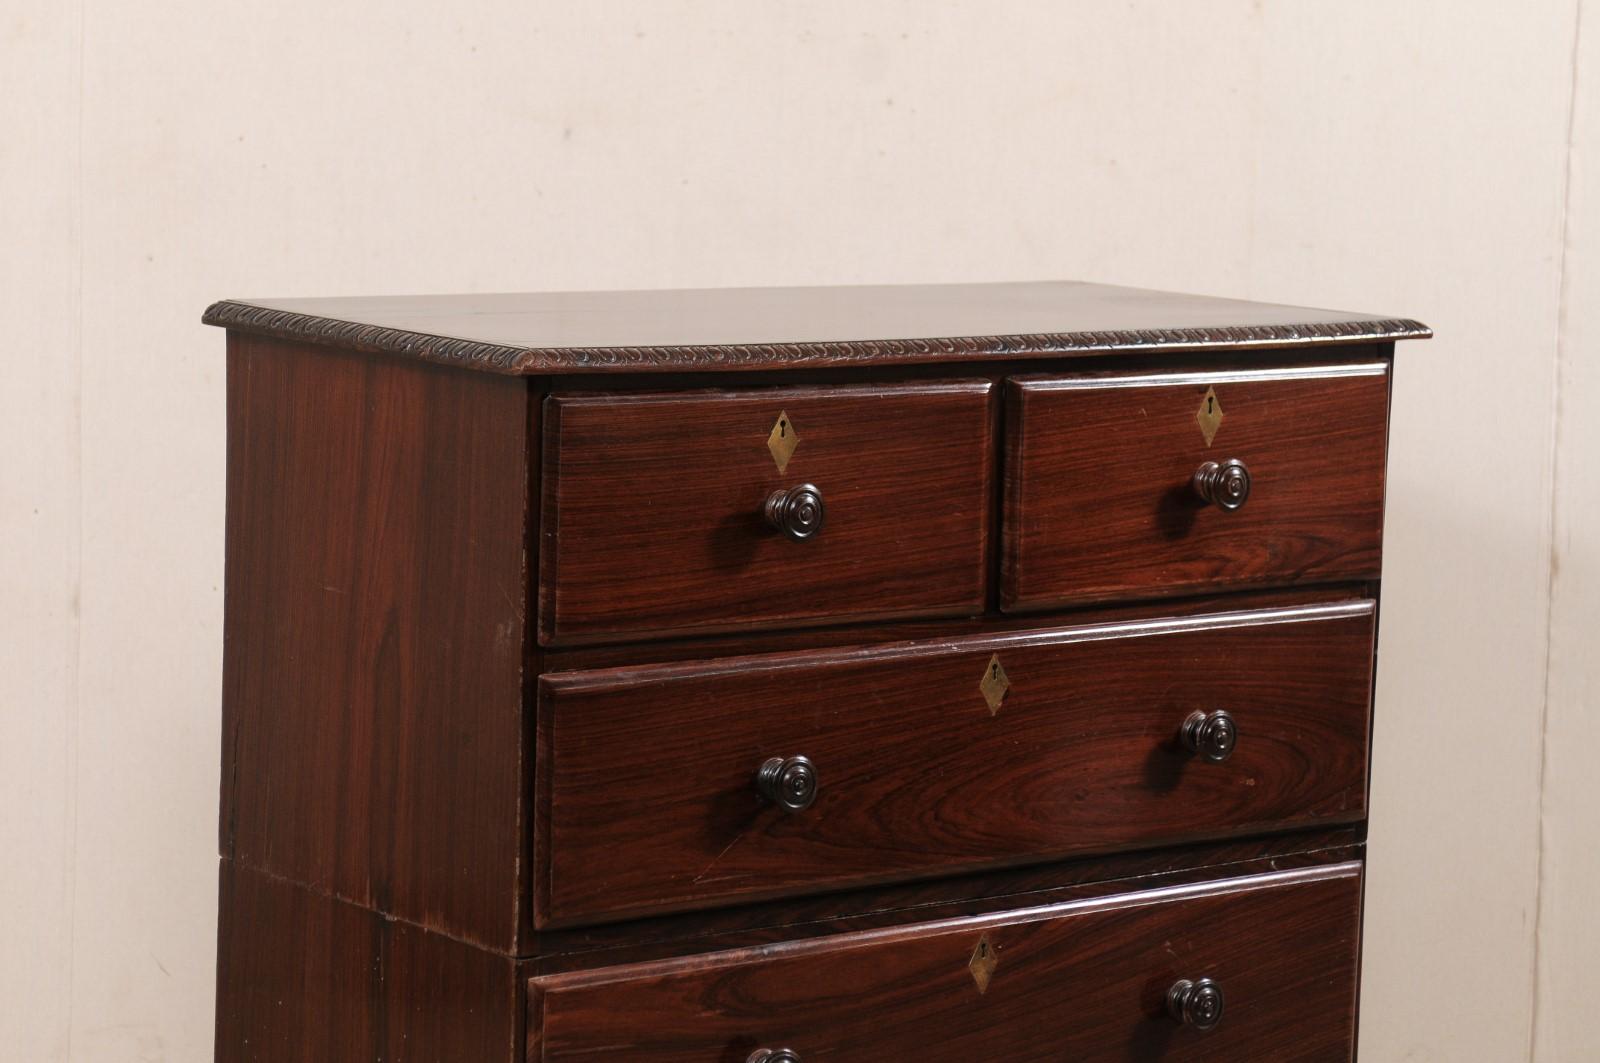 Indian British Colonial Rosewood Chest of Drawers w/ Egg-n-Dart Trim, Early 20th C For Sale